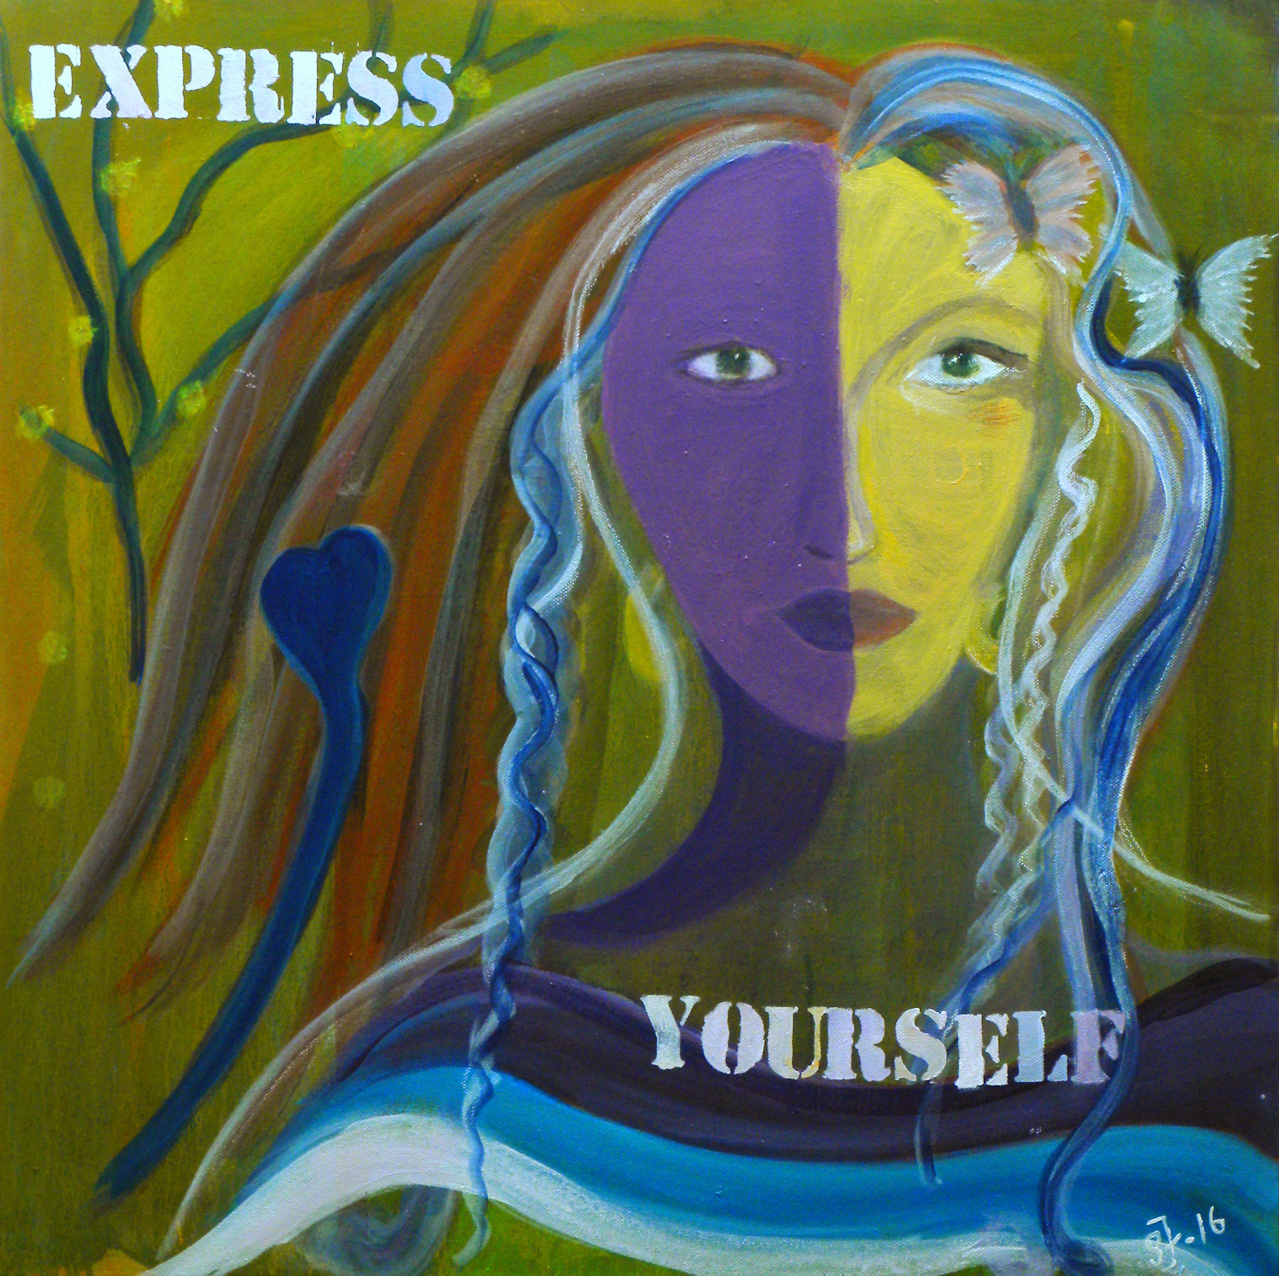 Express yourself  